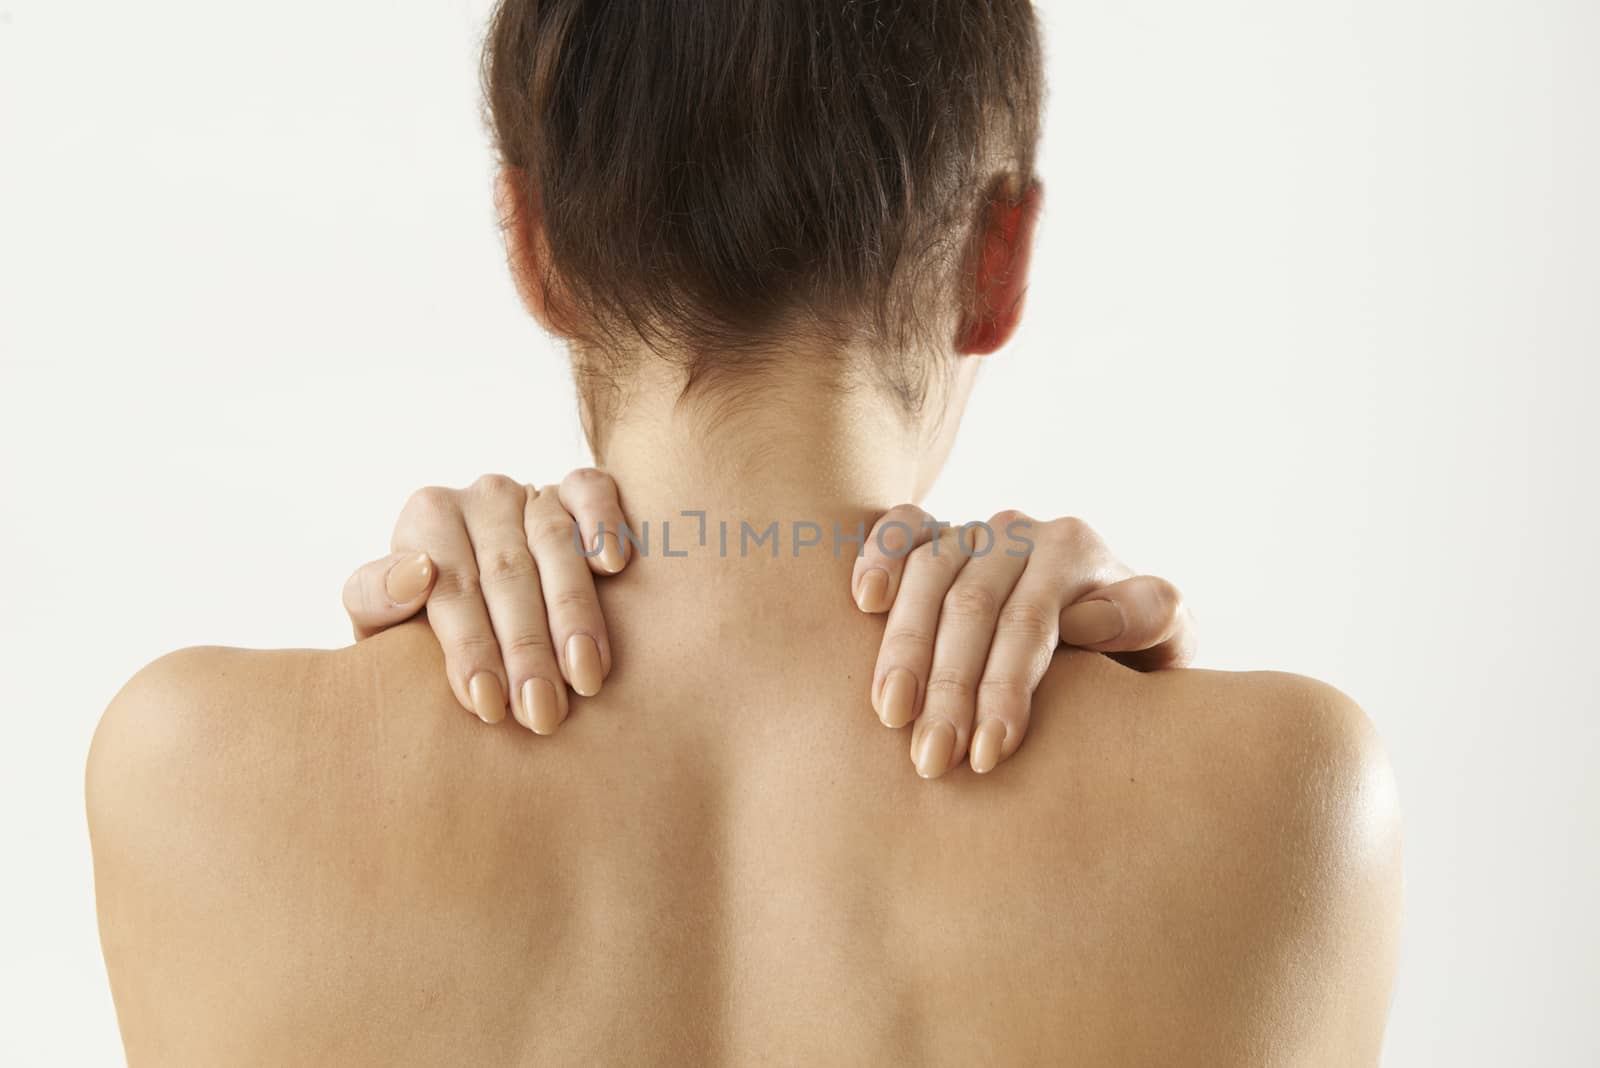 Studio Shot Of Woman With Painful Neck